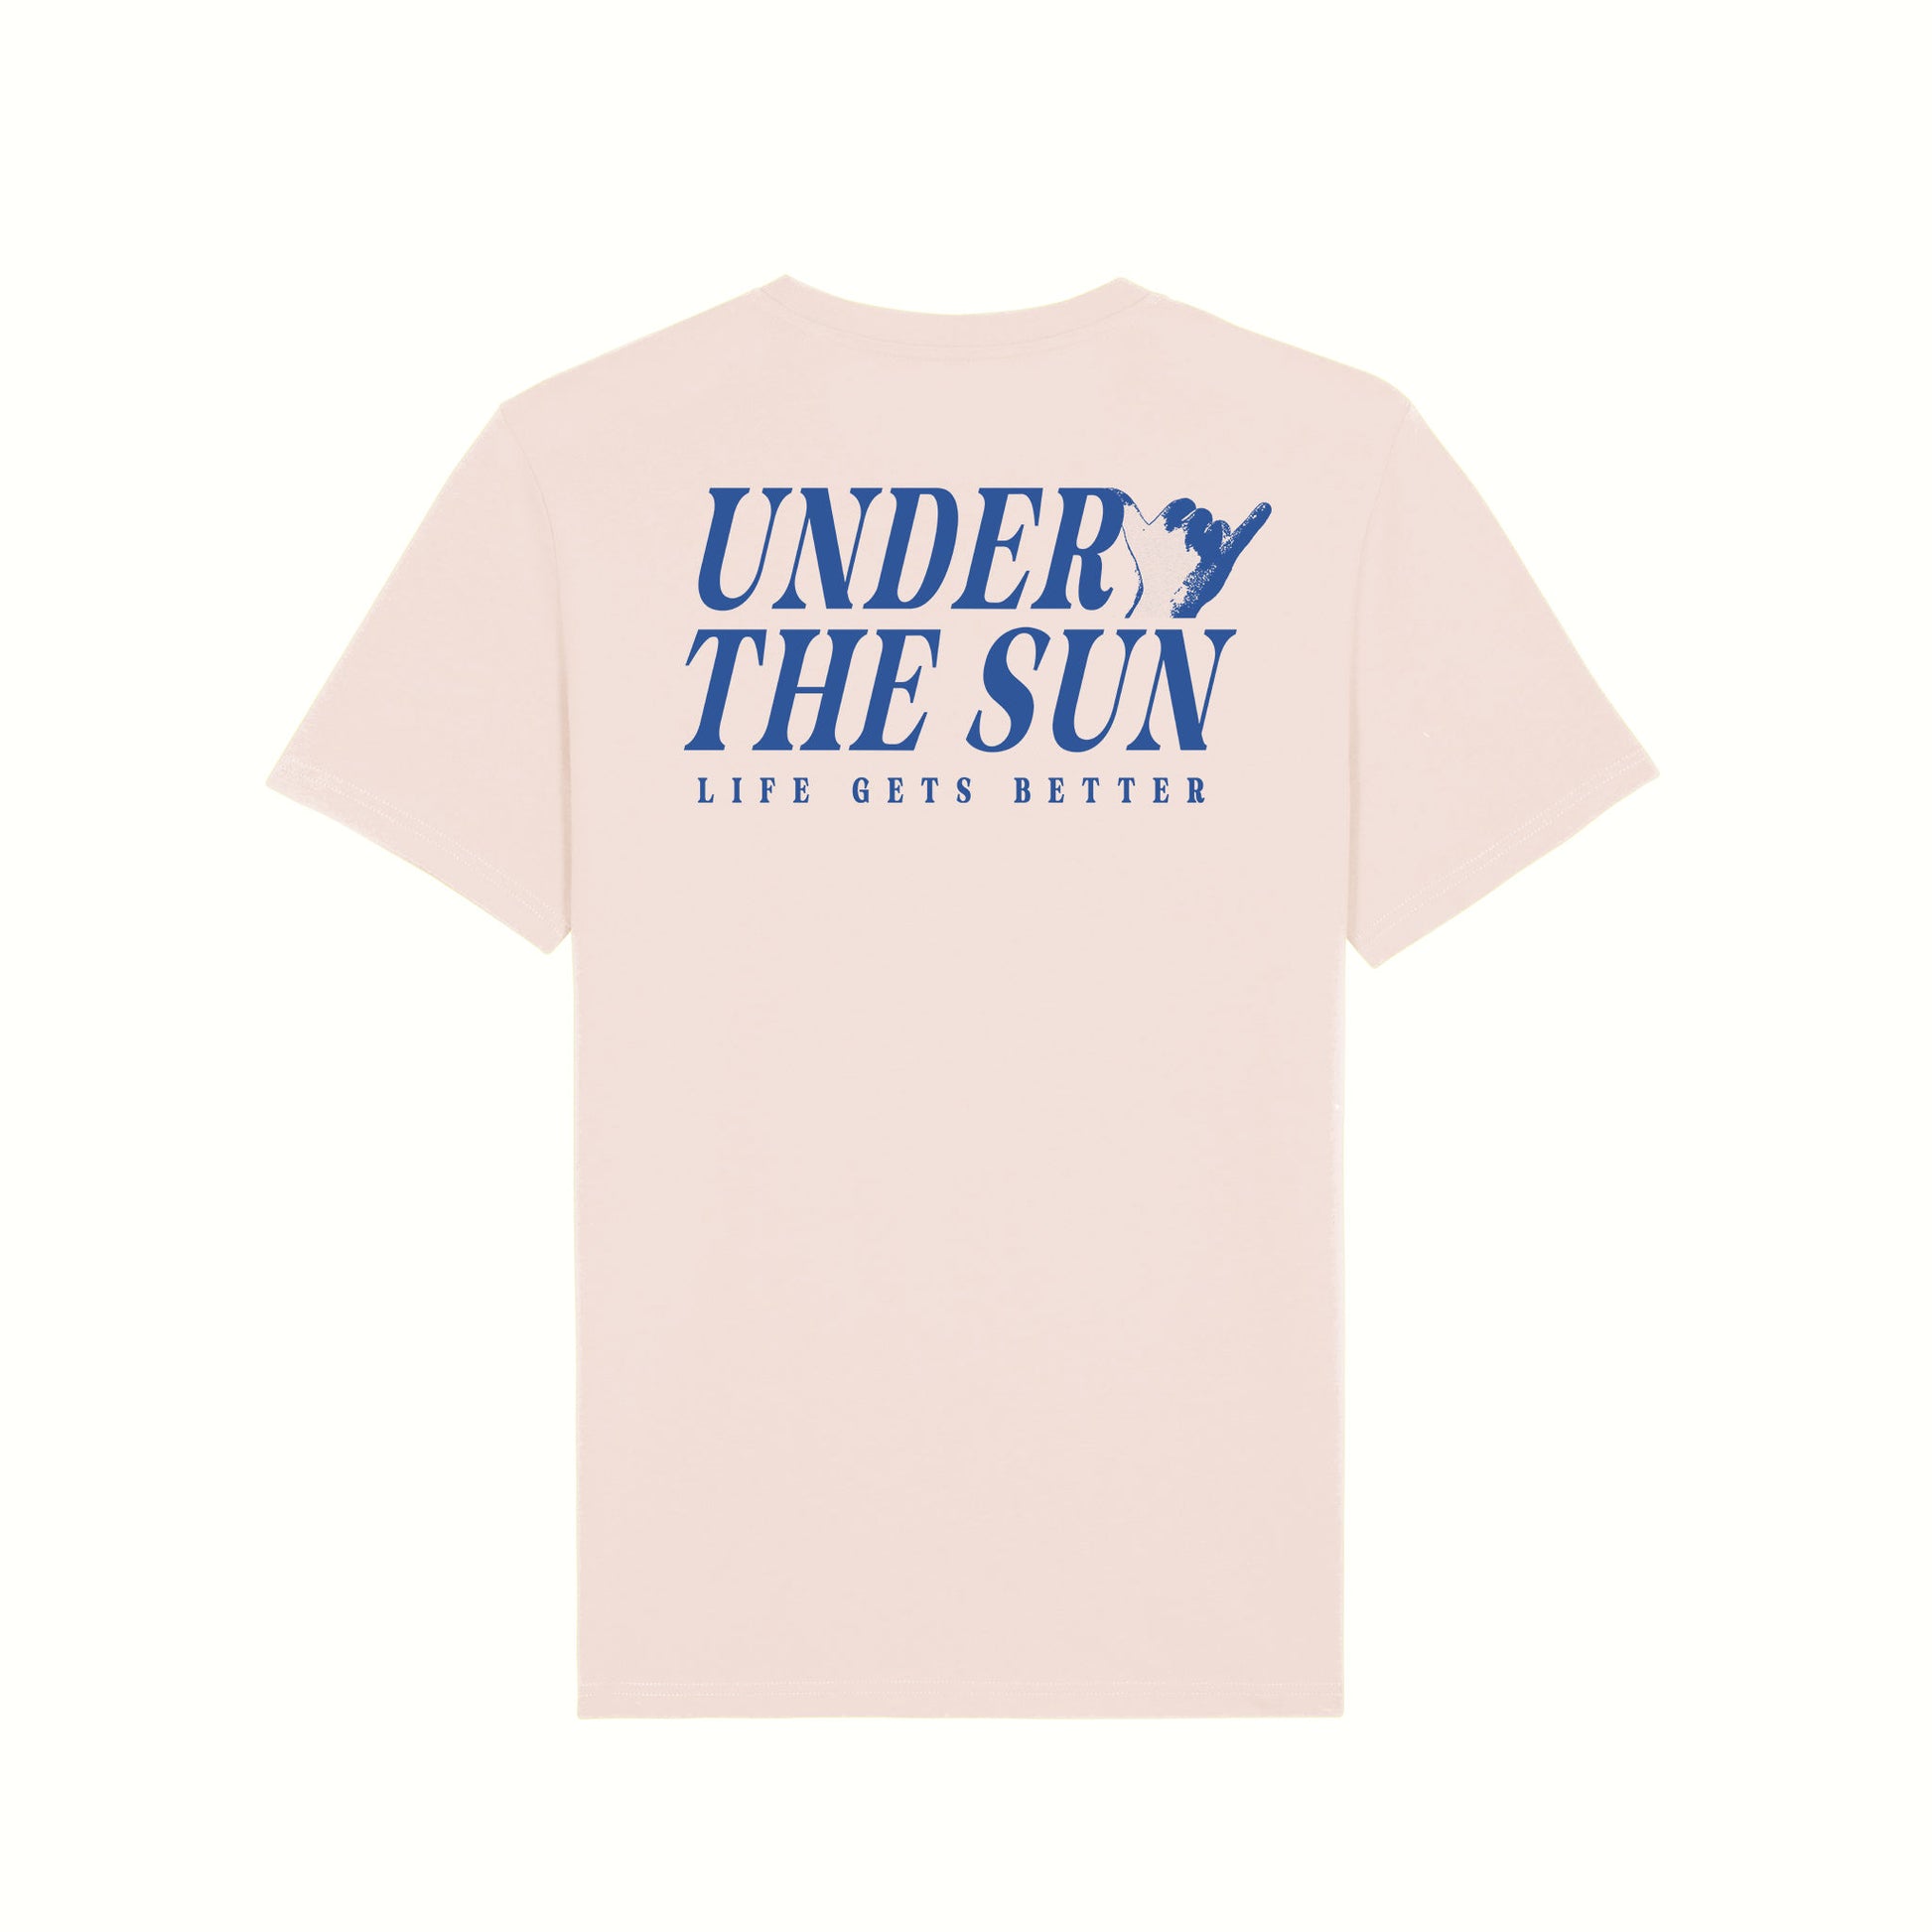 Fear The Ordinary candy pink premium organic cotton t-shirt with blue cobalt under the sun summer inspired back print.